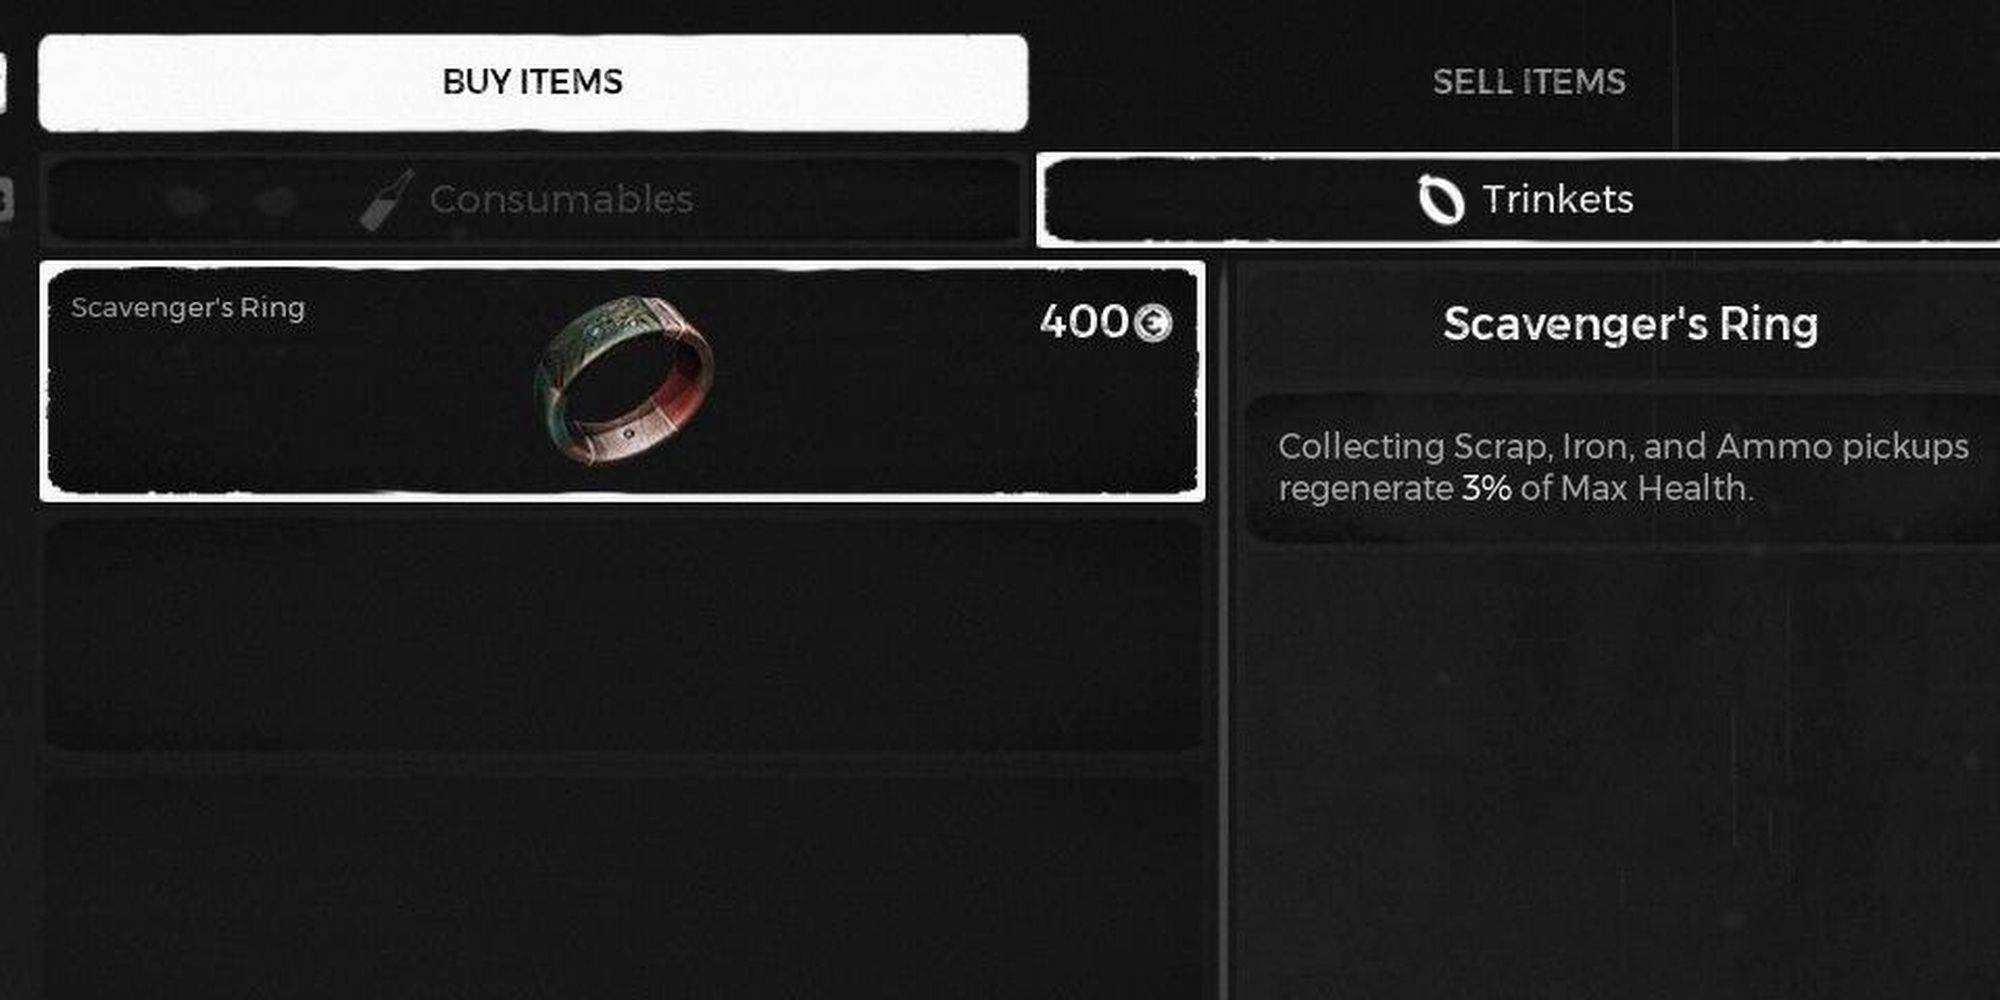 Remnant From The Ashes: The Scavenger's Ring Item Description